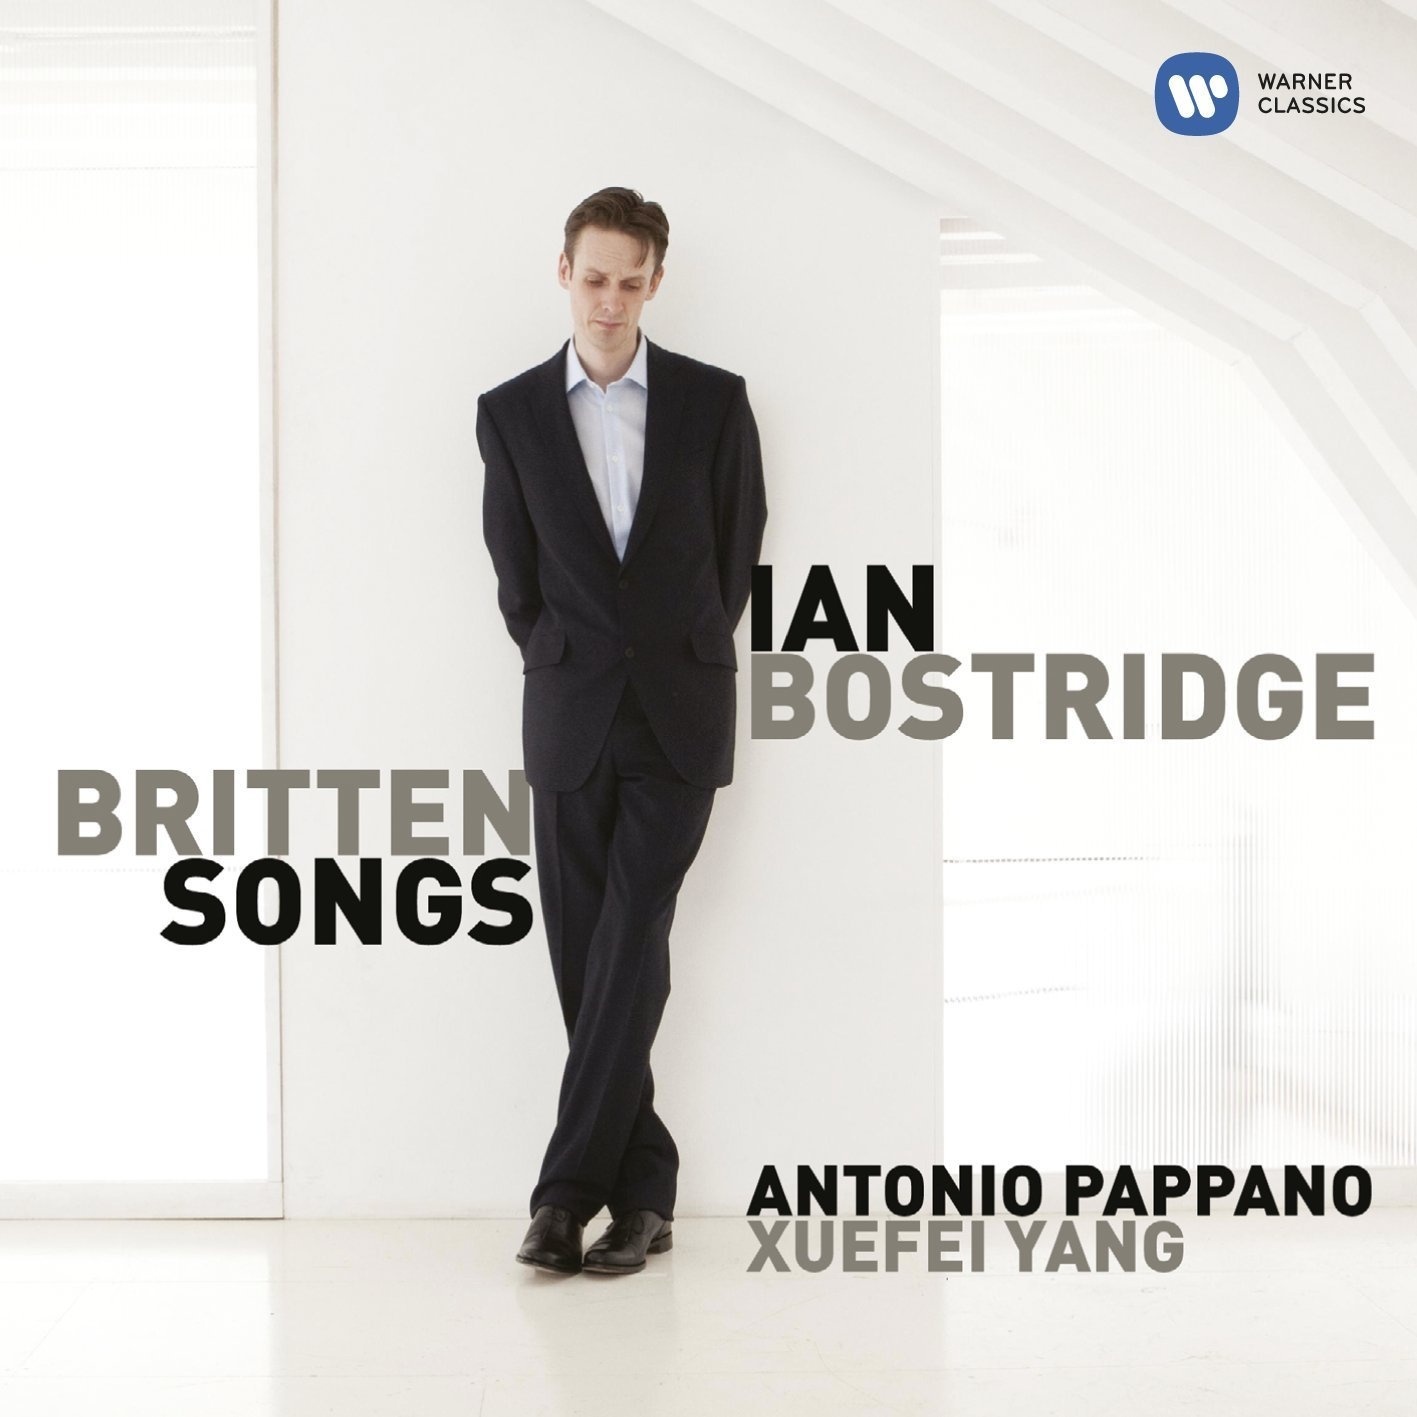 Benjamin Britten: Songs from the Chinese Op. 58  The Old Lute words: Po Chü i